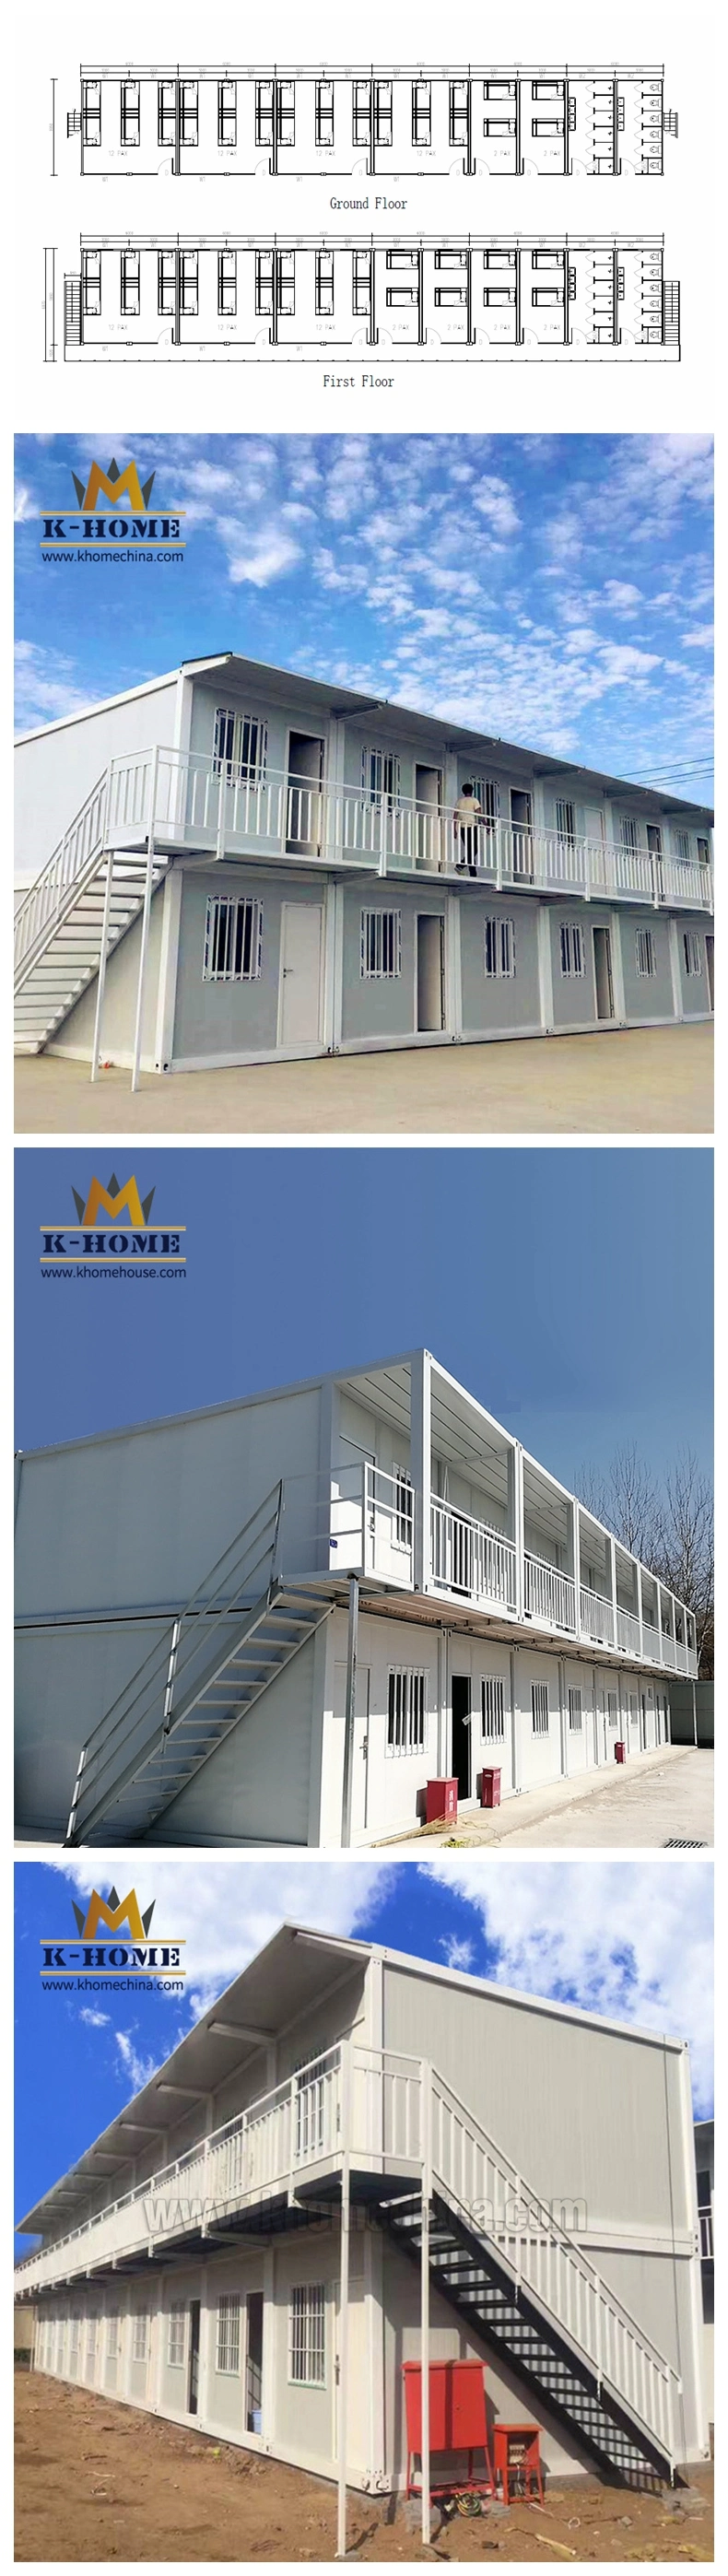 off-Site Construction Prefabricated Building Worker Quarters